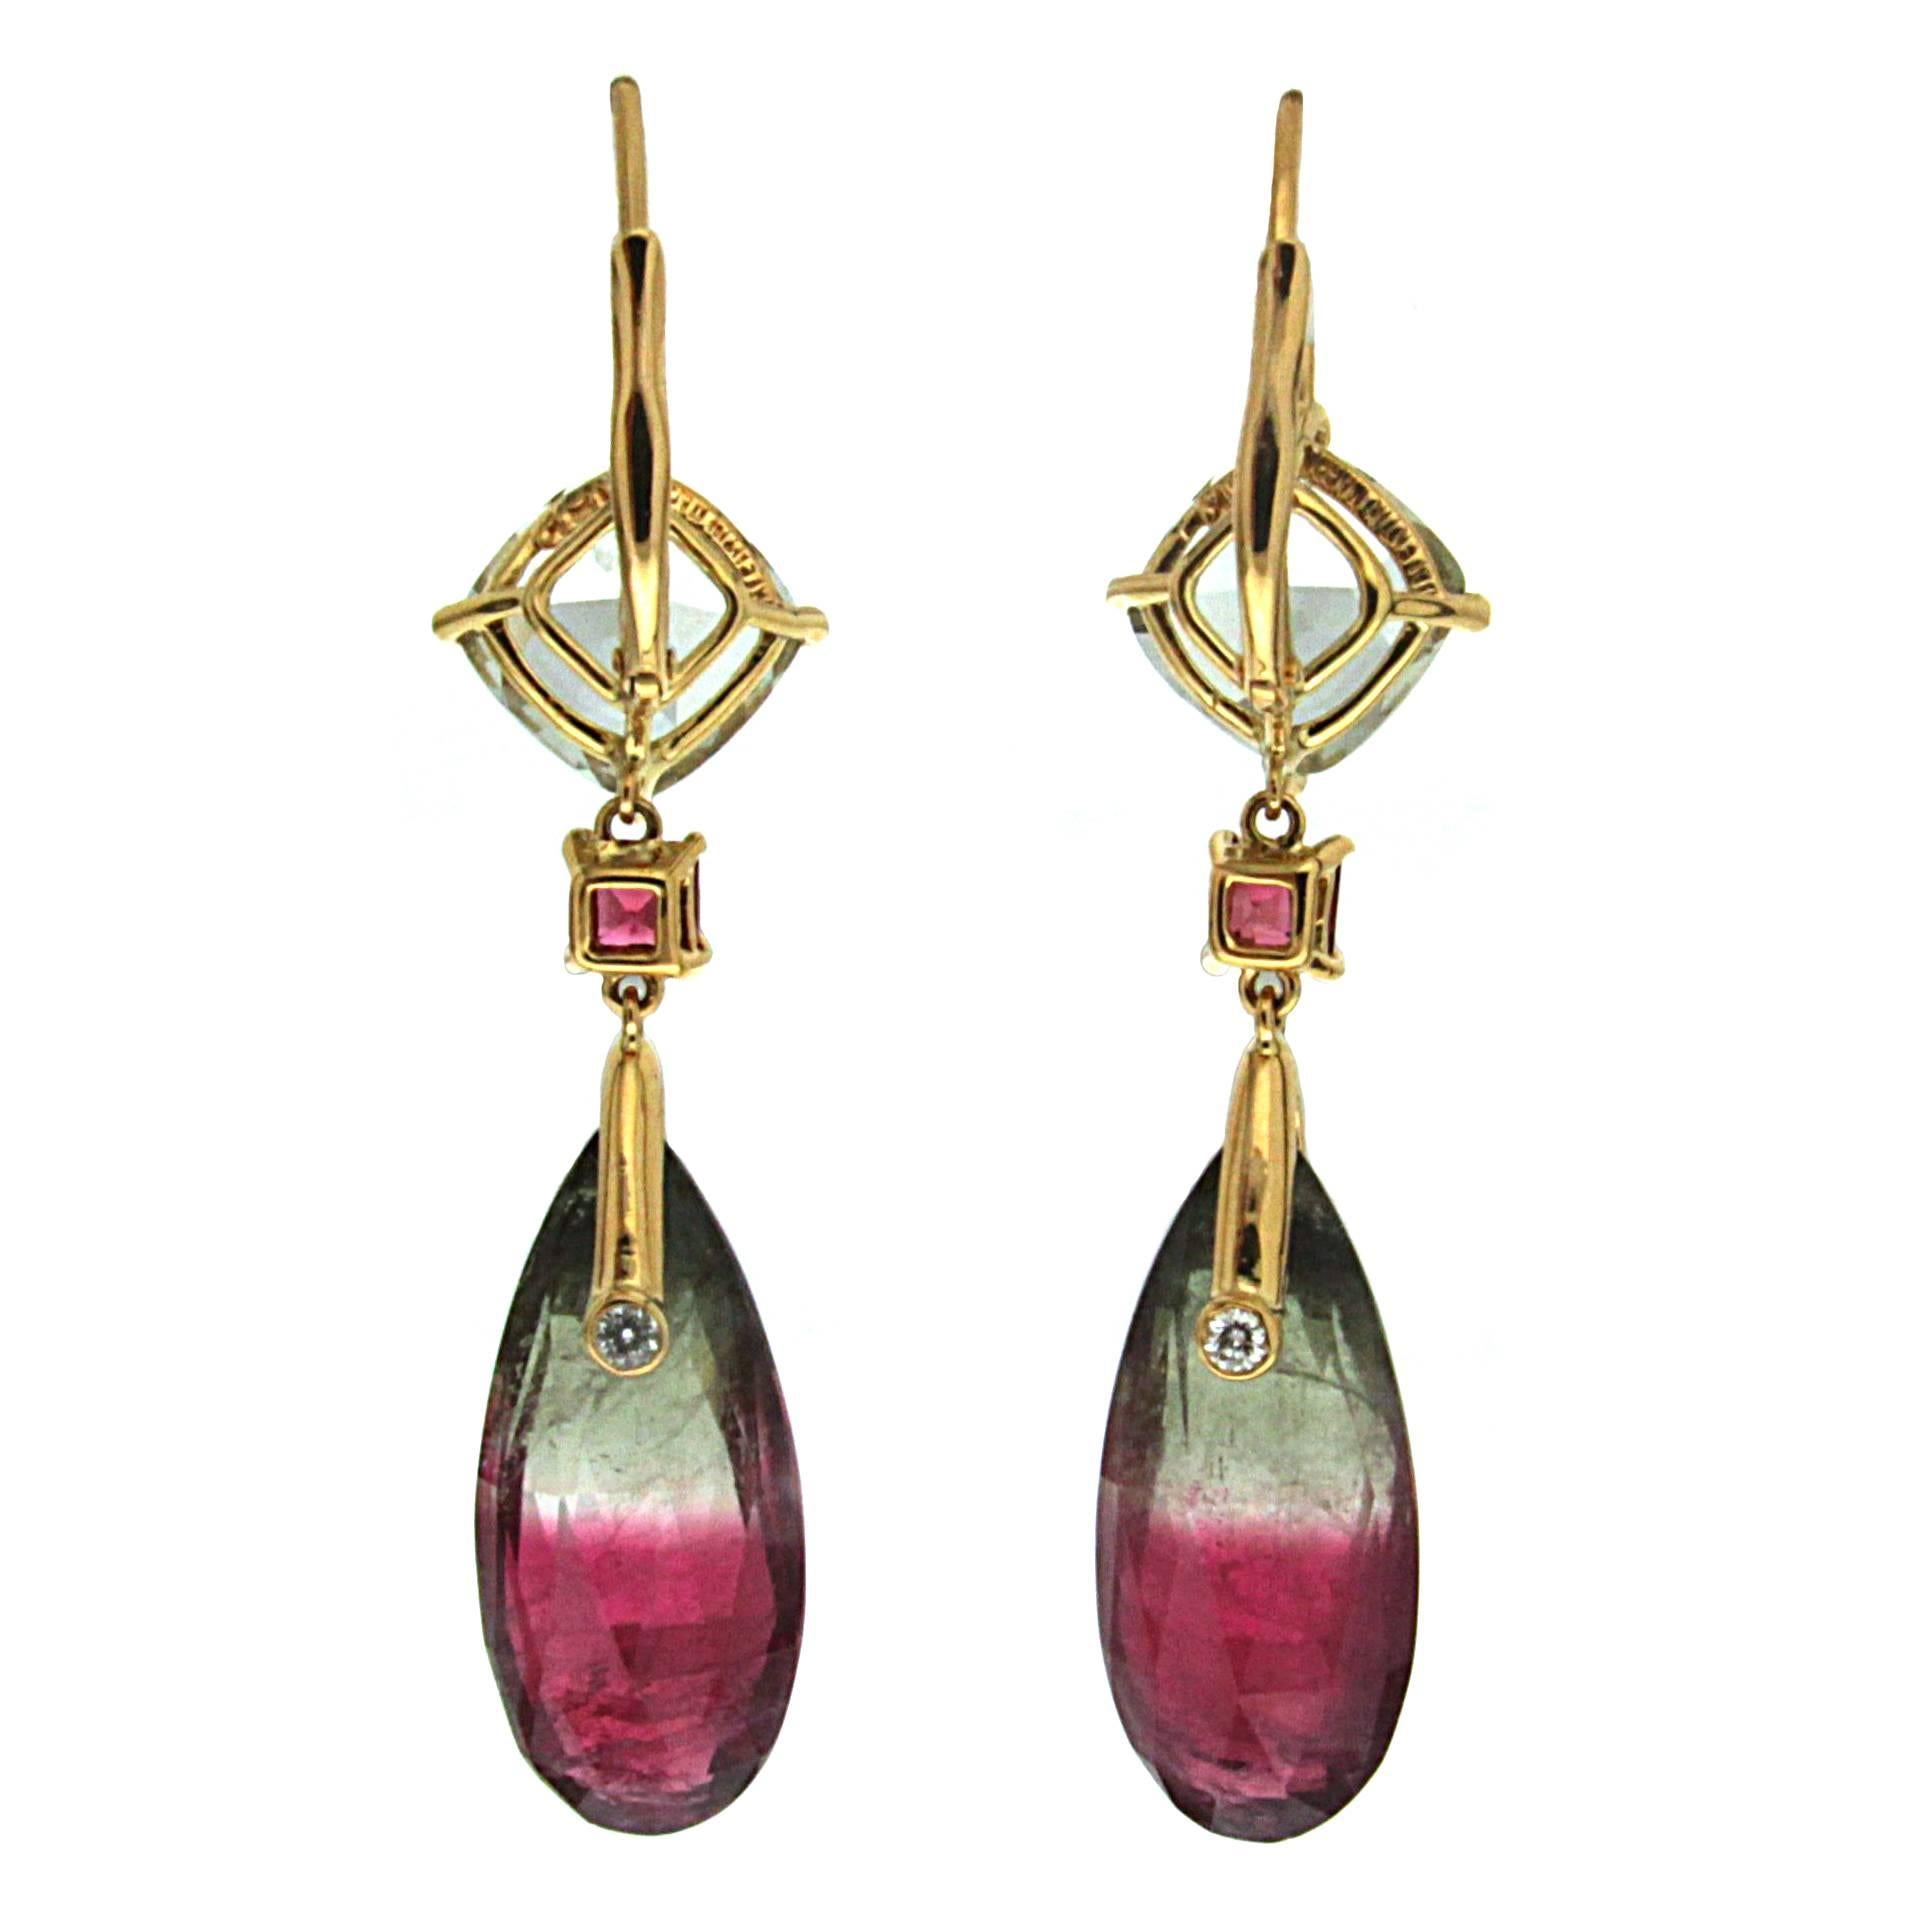 This pair of unique earrings feature Cushion Beryl top and square Rhodolite centers with Bicolor Tourmaline drops and four round brilliant diamonds. The earrings are finished in 18kt yellow gold and lever back.